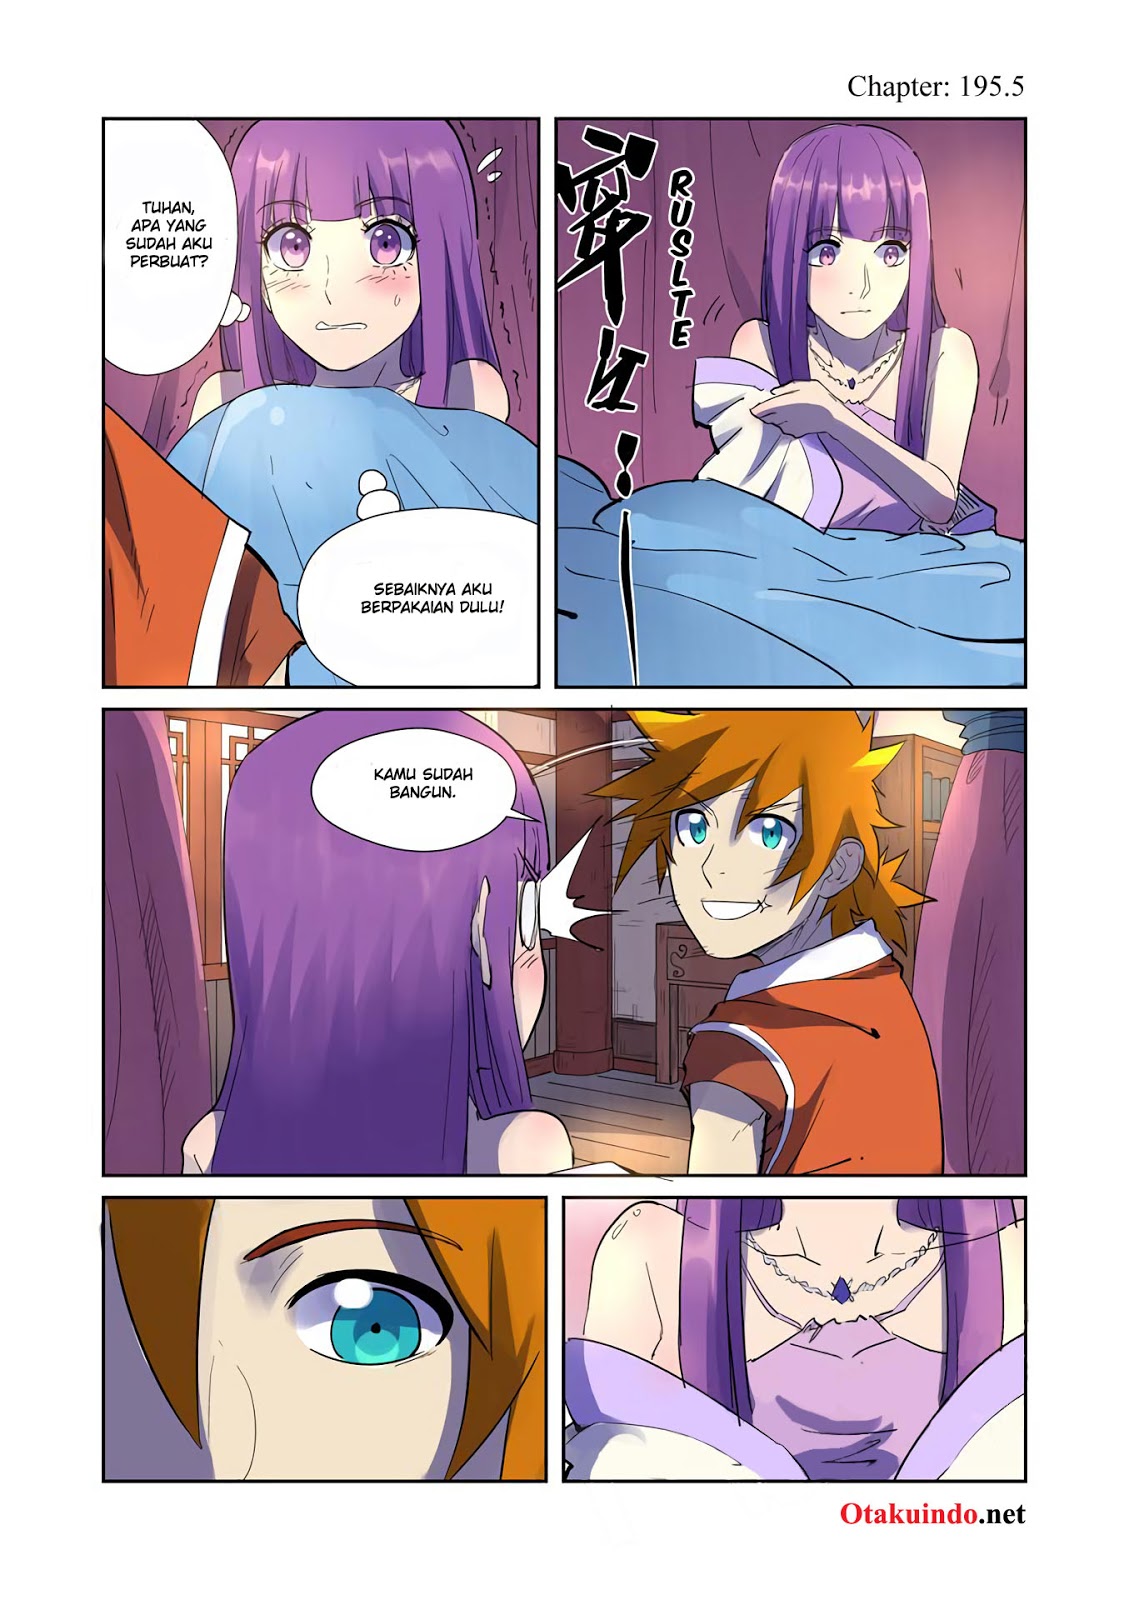 Tales of Demons and Gods Chapter 195-5